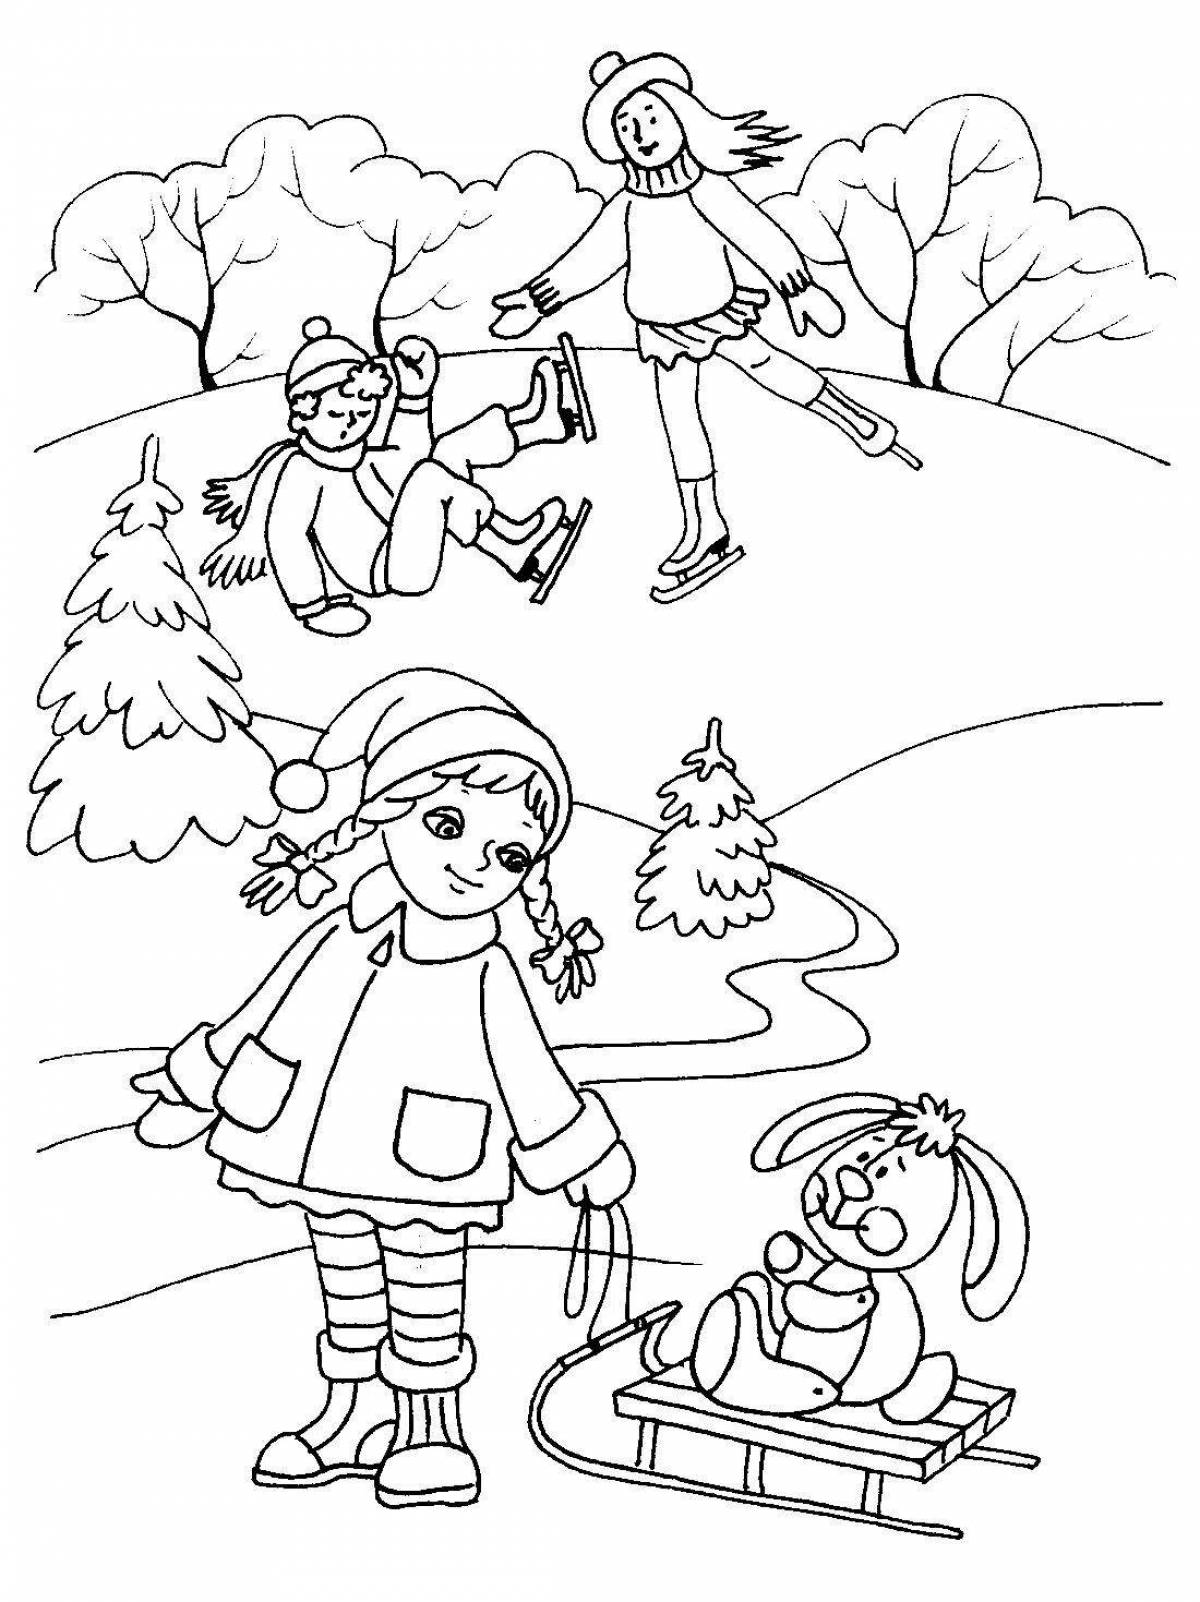 Playful winter safety page for preschoolers